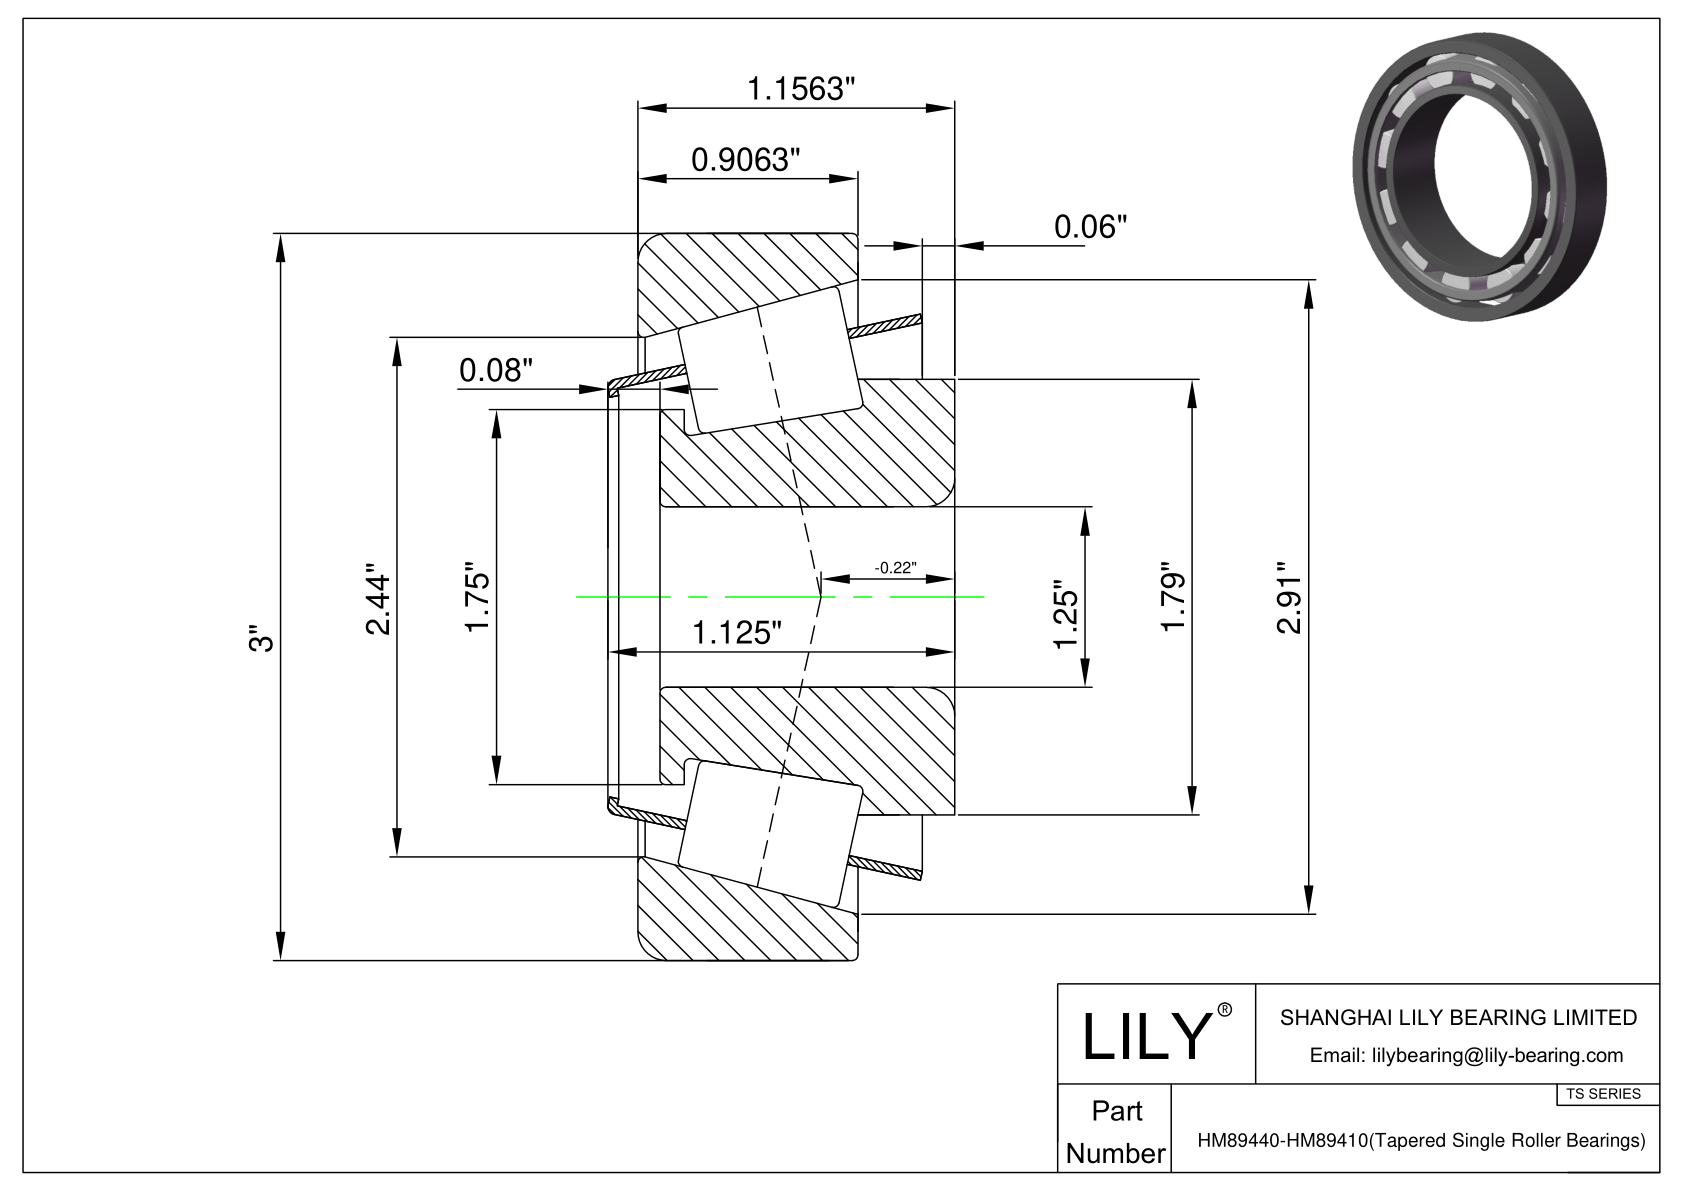 HM89440-HM89410 TS (Tapered Single Roller Bearings) (Imperial) cad drawing